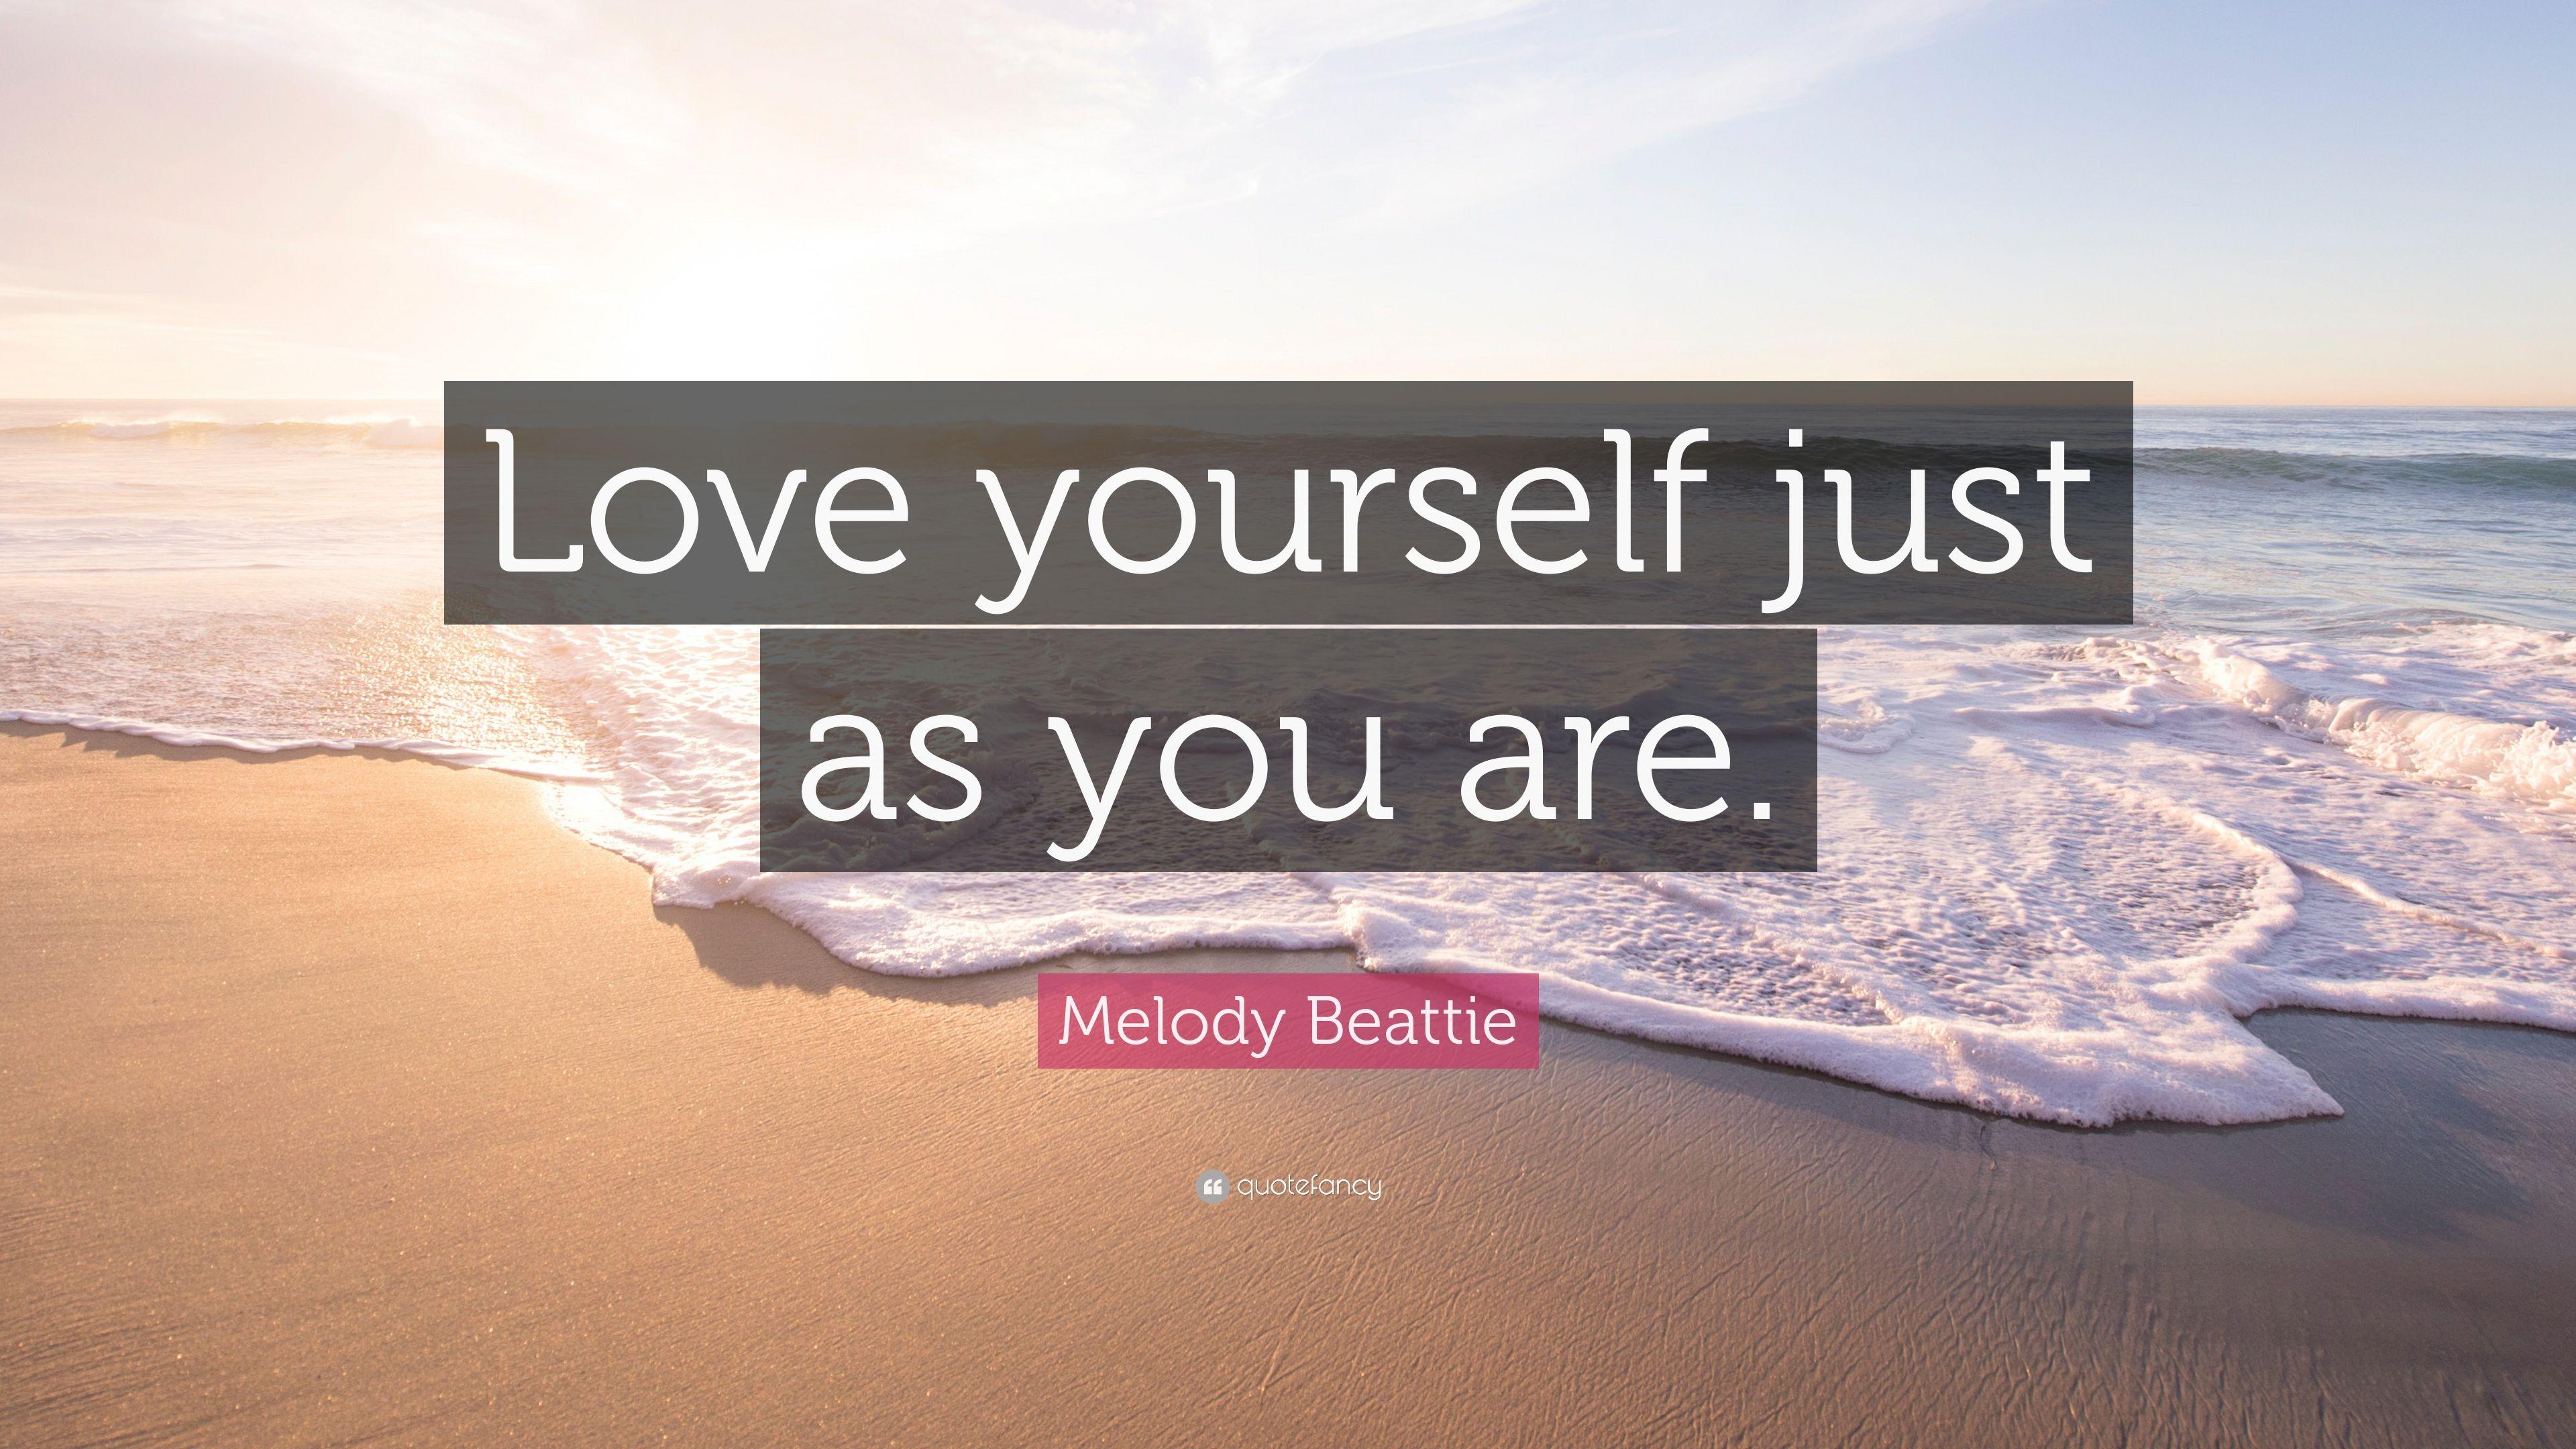 Melody Beattie Quote: “Love yourself just as you are.” 12